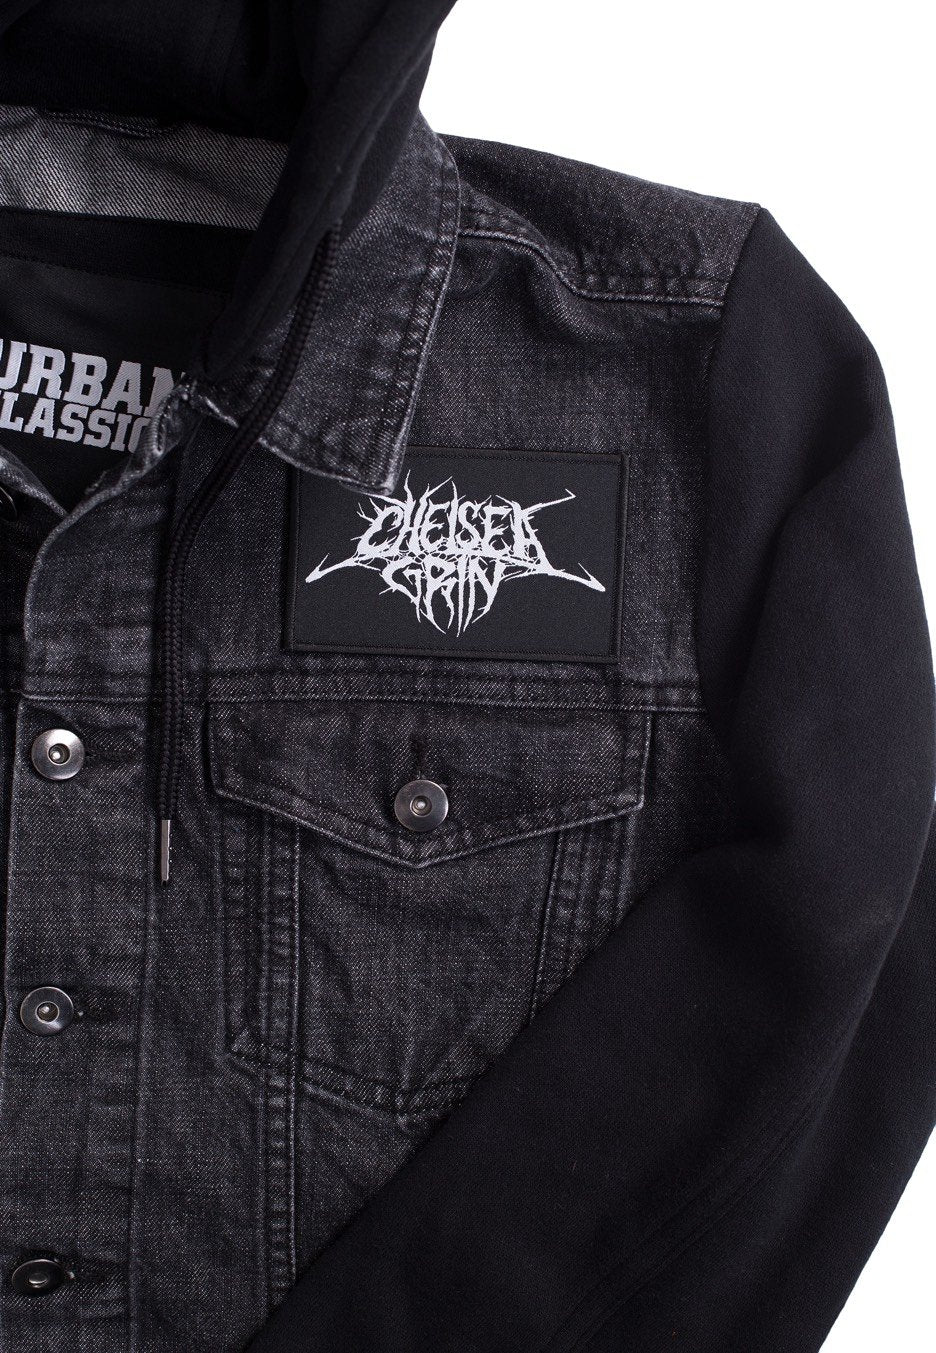 Chelsea Grin - Logo - Patch | Neutral-Image